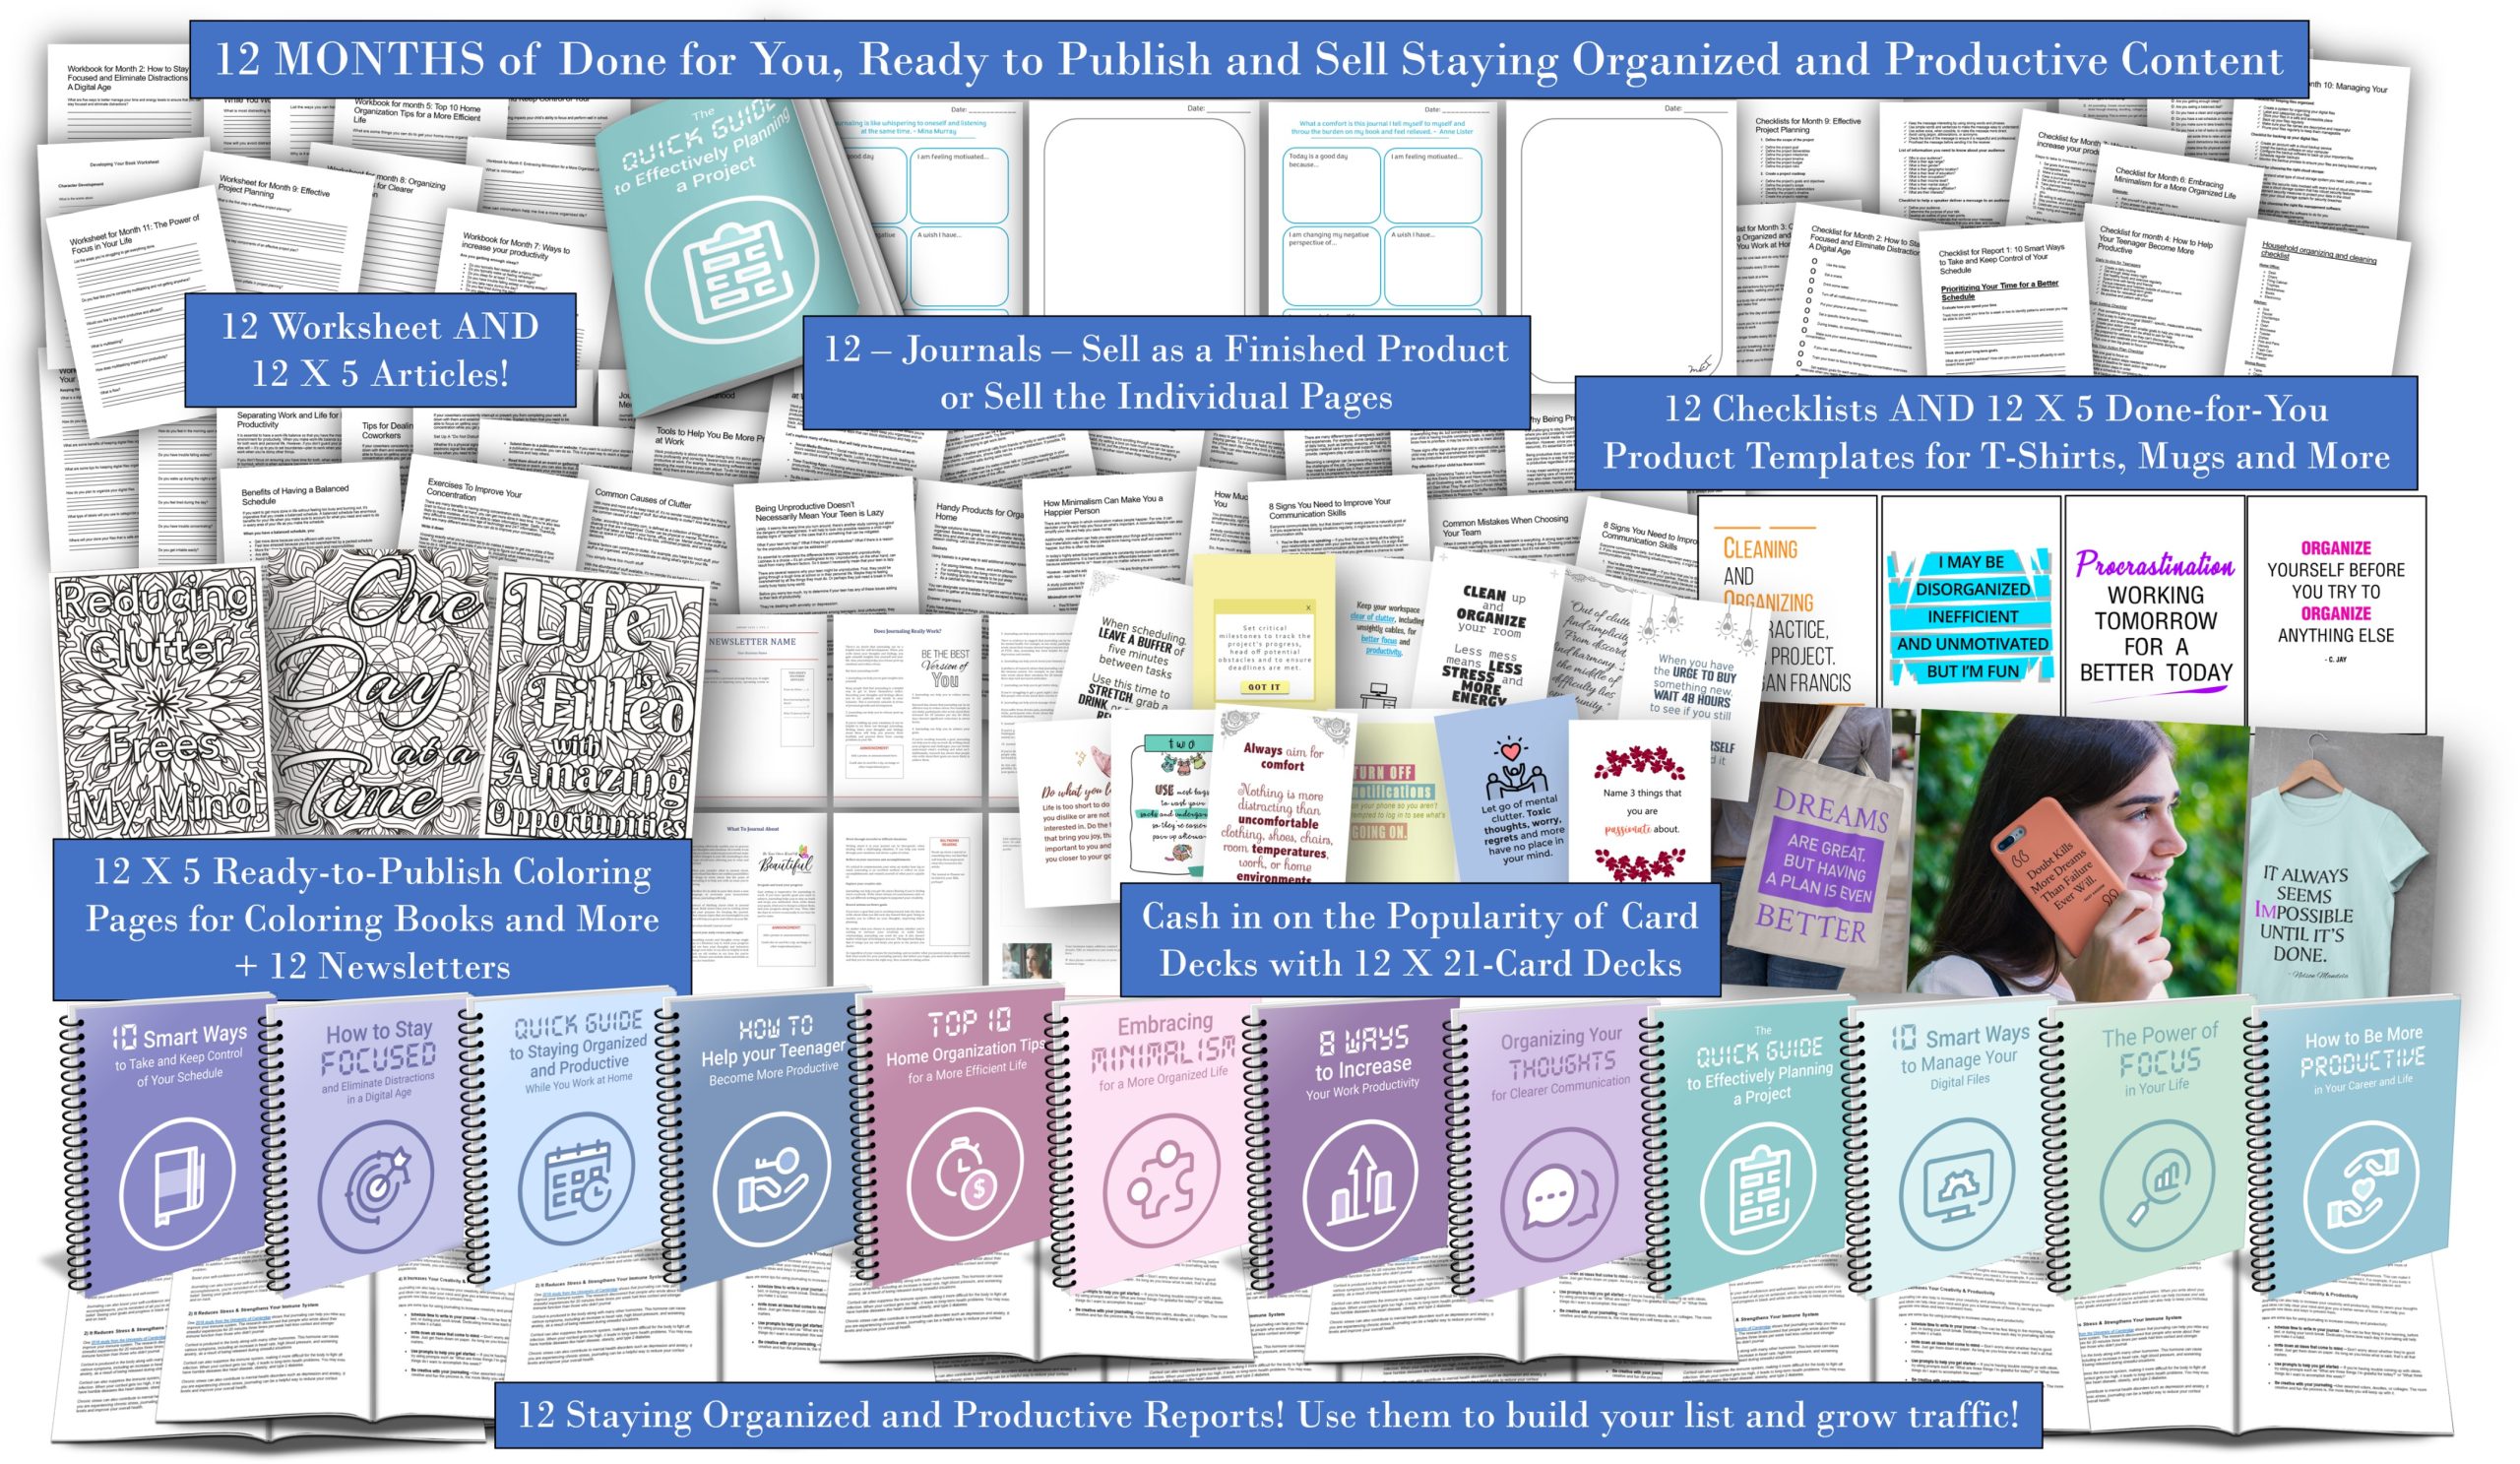 Staying Organized and Productive PLR Pack